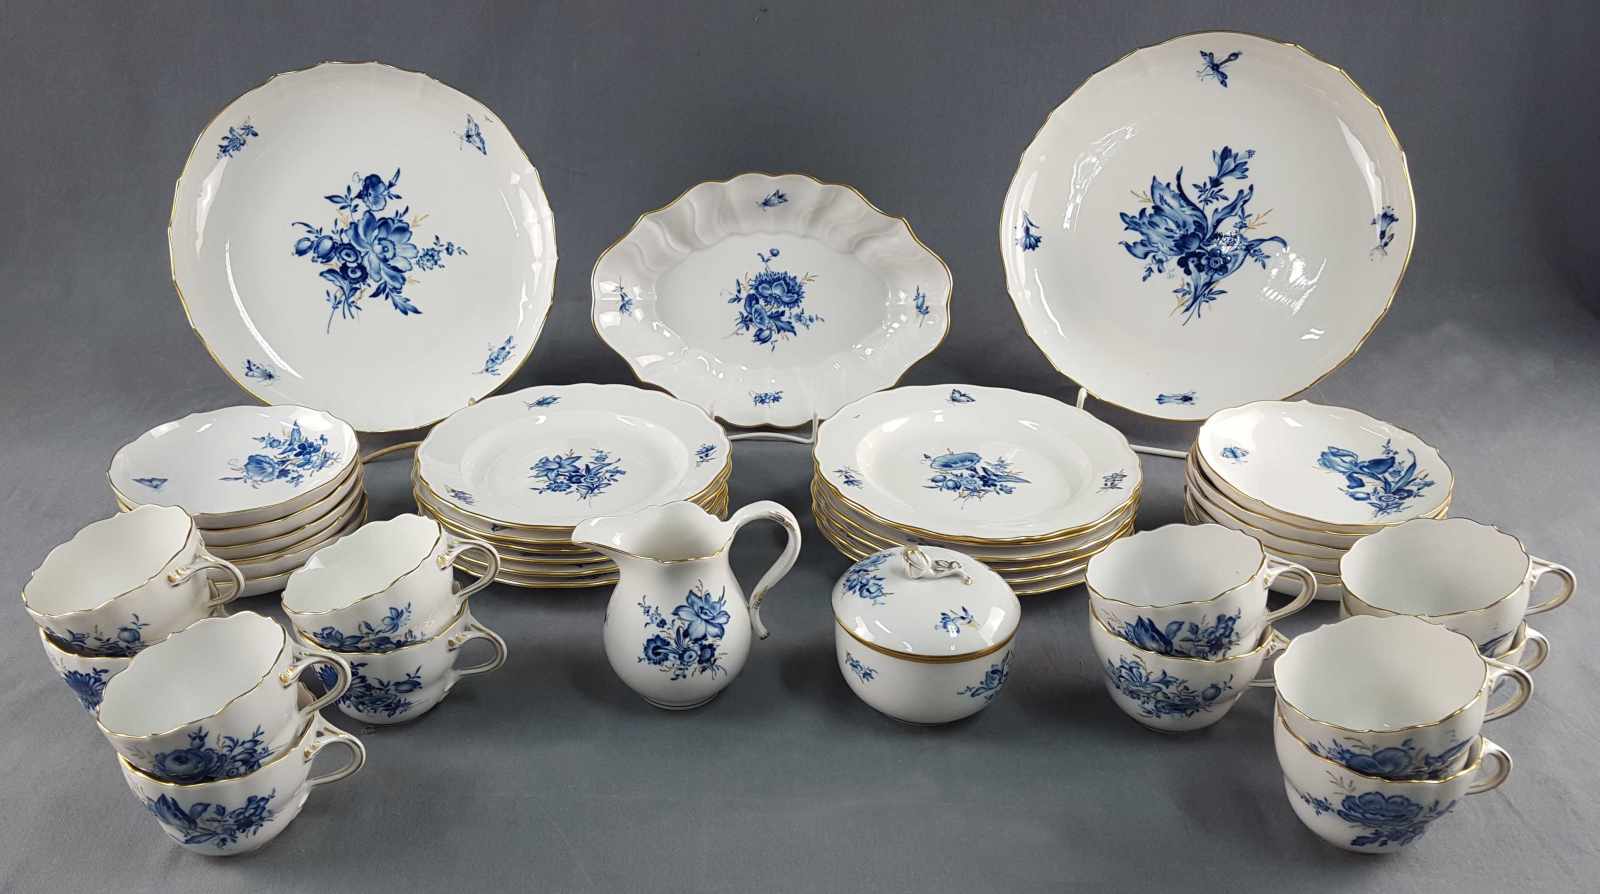 Coffee service Meissen porcelain for 12 persons. No coffee pot.